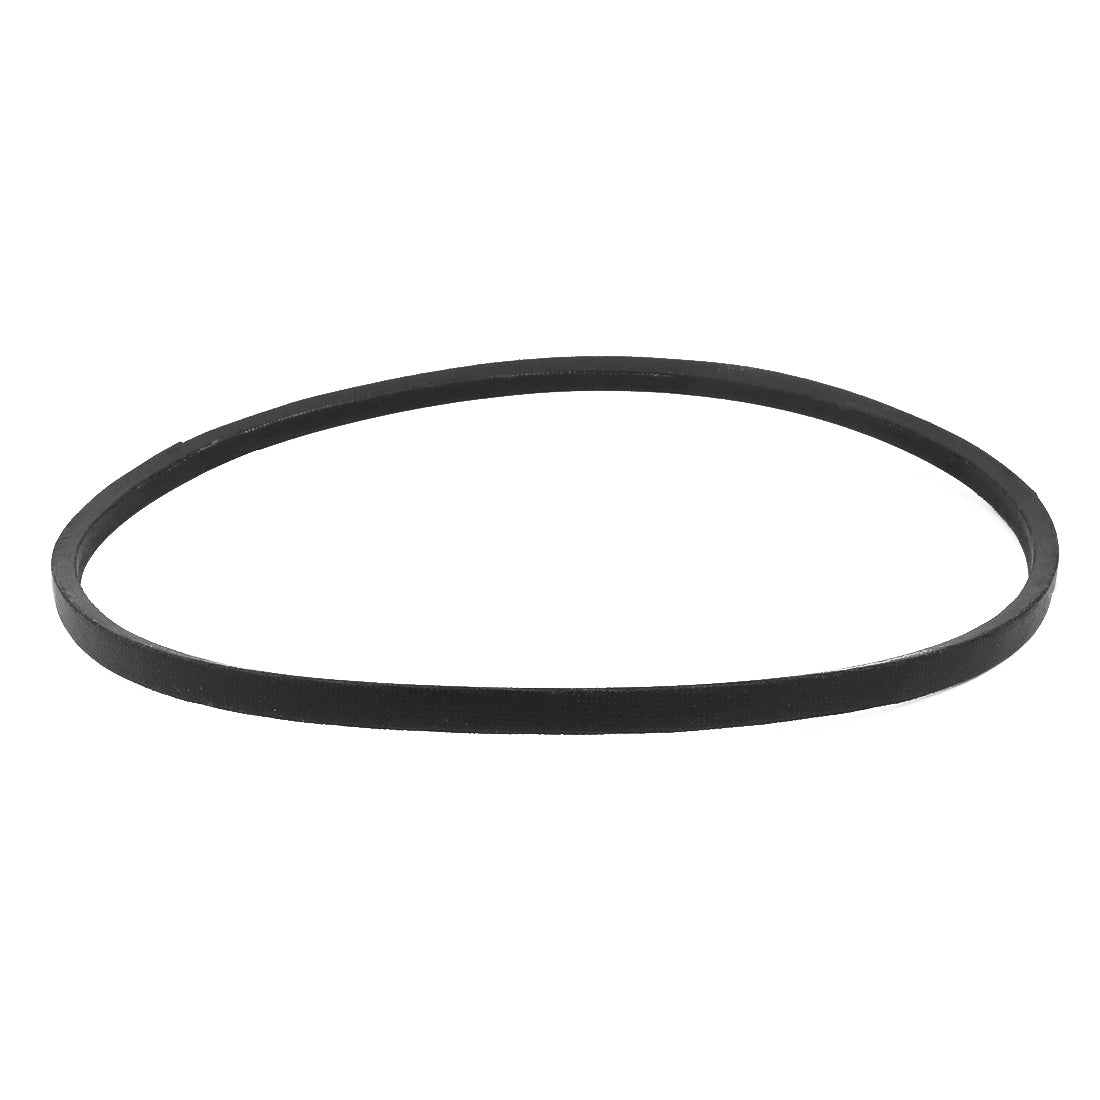 uxcell Uxcell O-630 Rubber Transmission Drive Belt V-Belt 9mm Wide 6mm Thick for Washing Machine